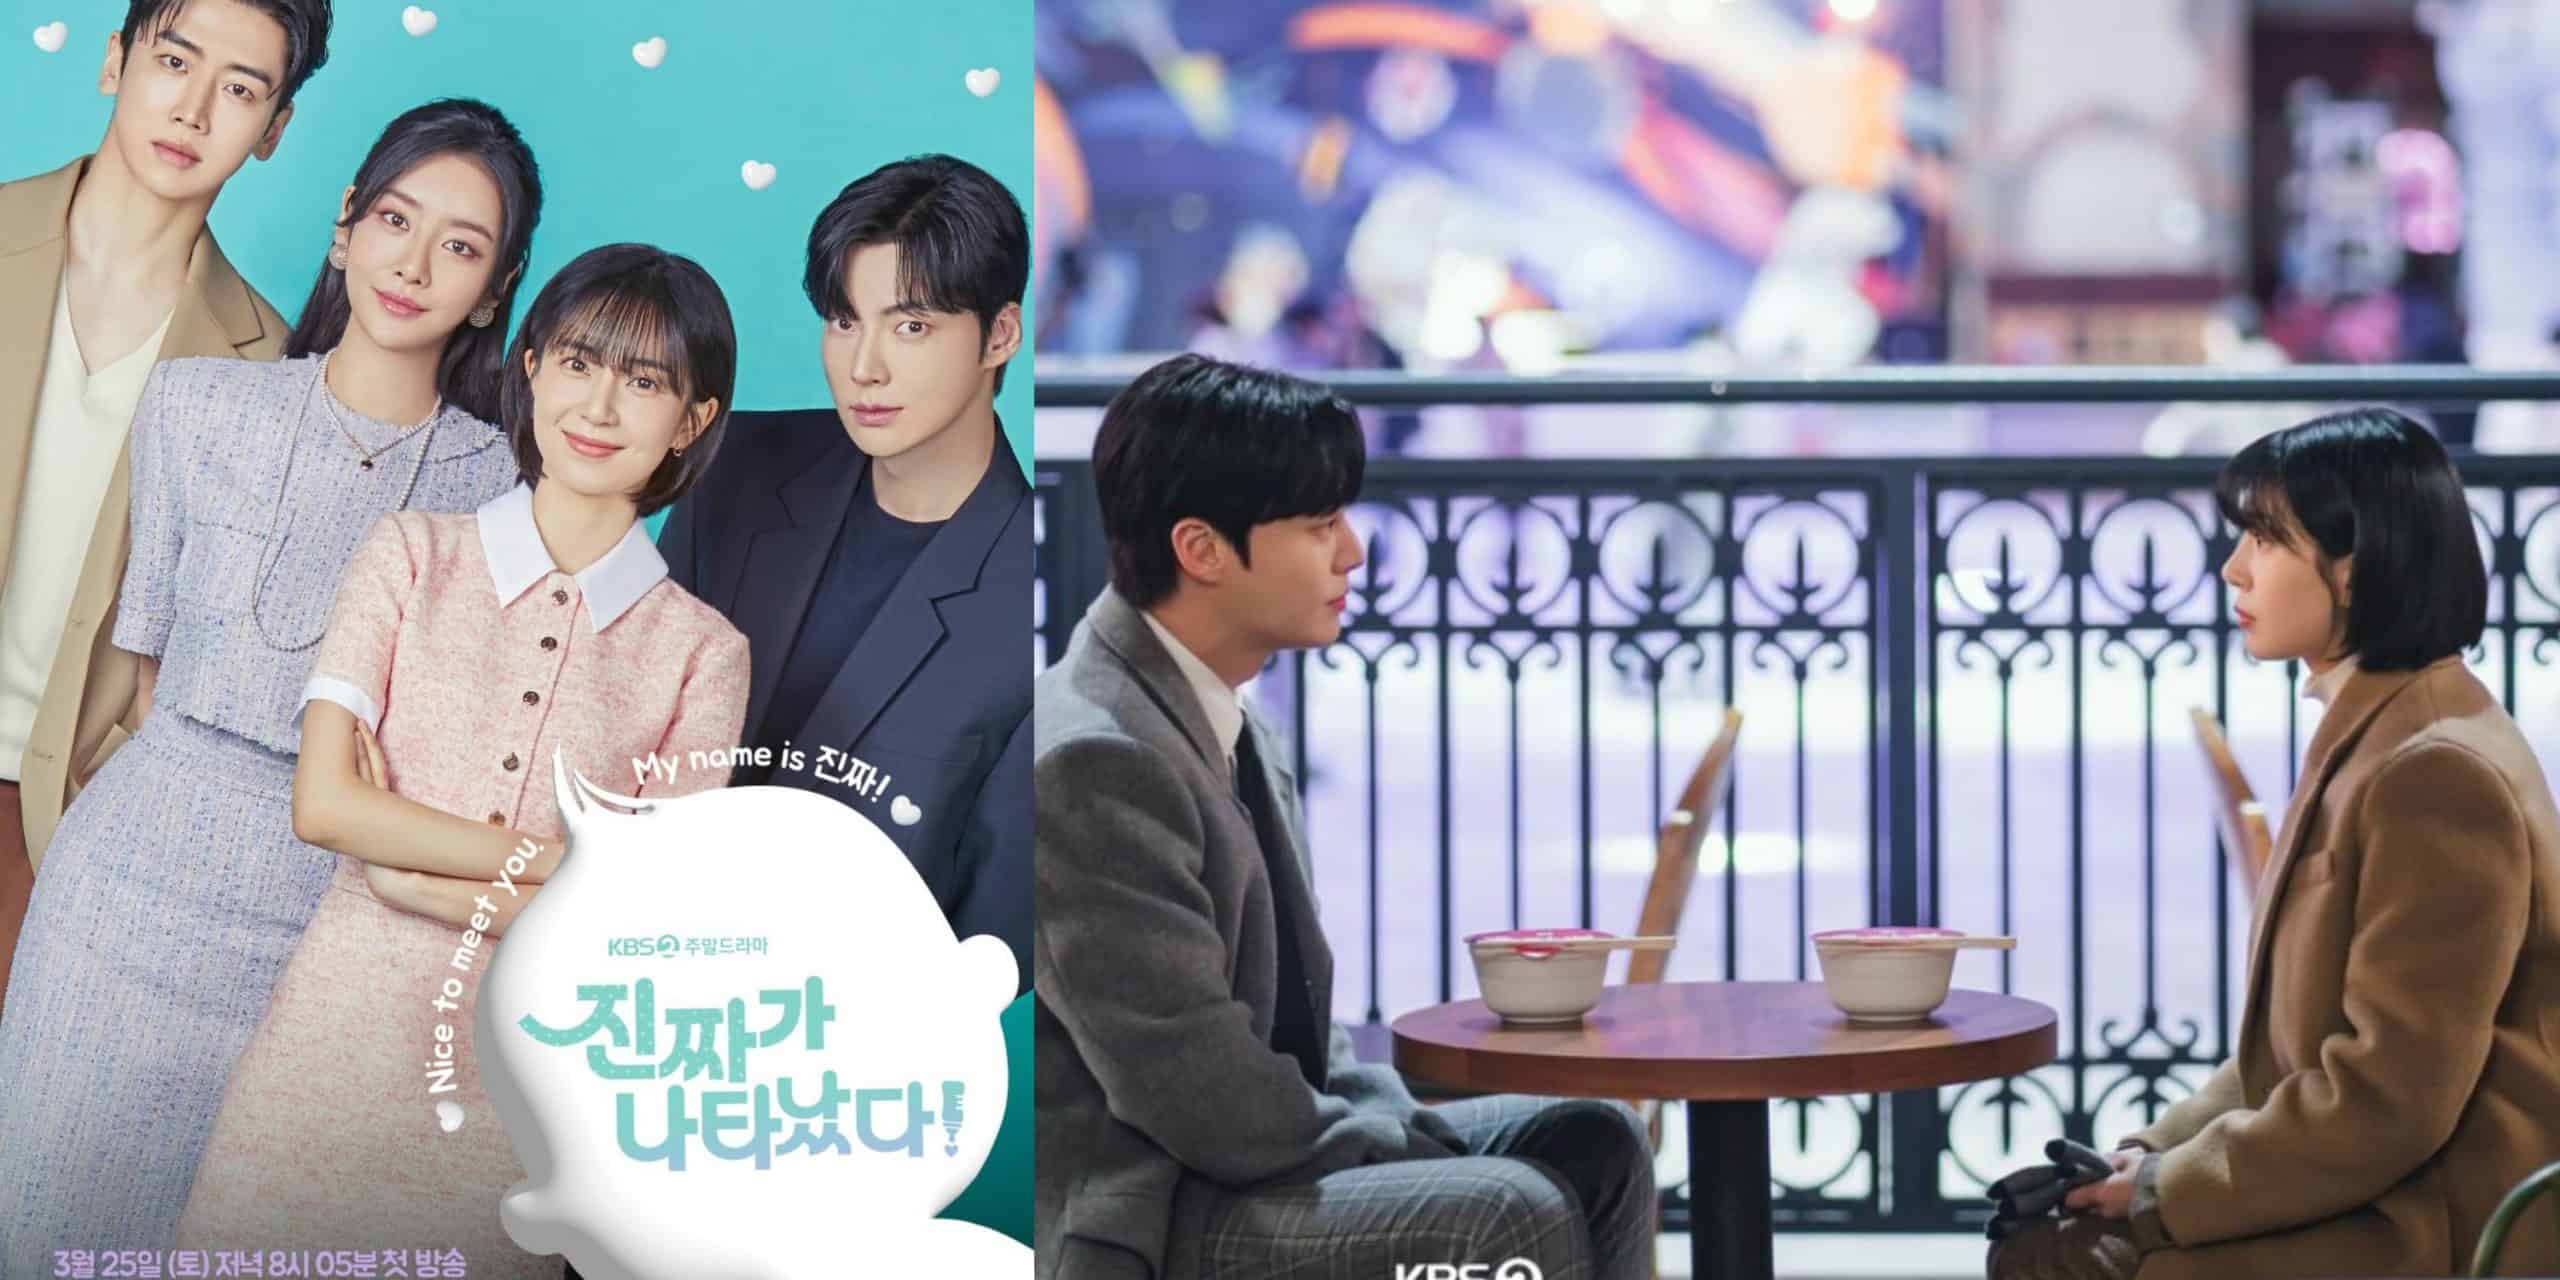 The Real Has Come! Korean Romance Drama Episode 6 Release Date